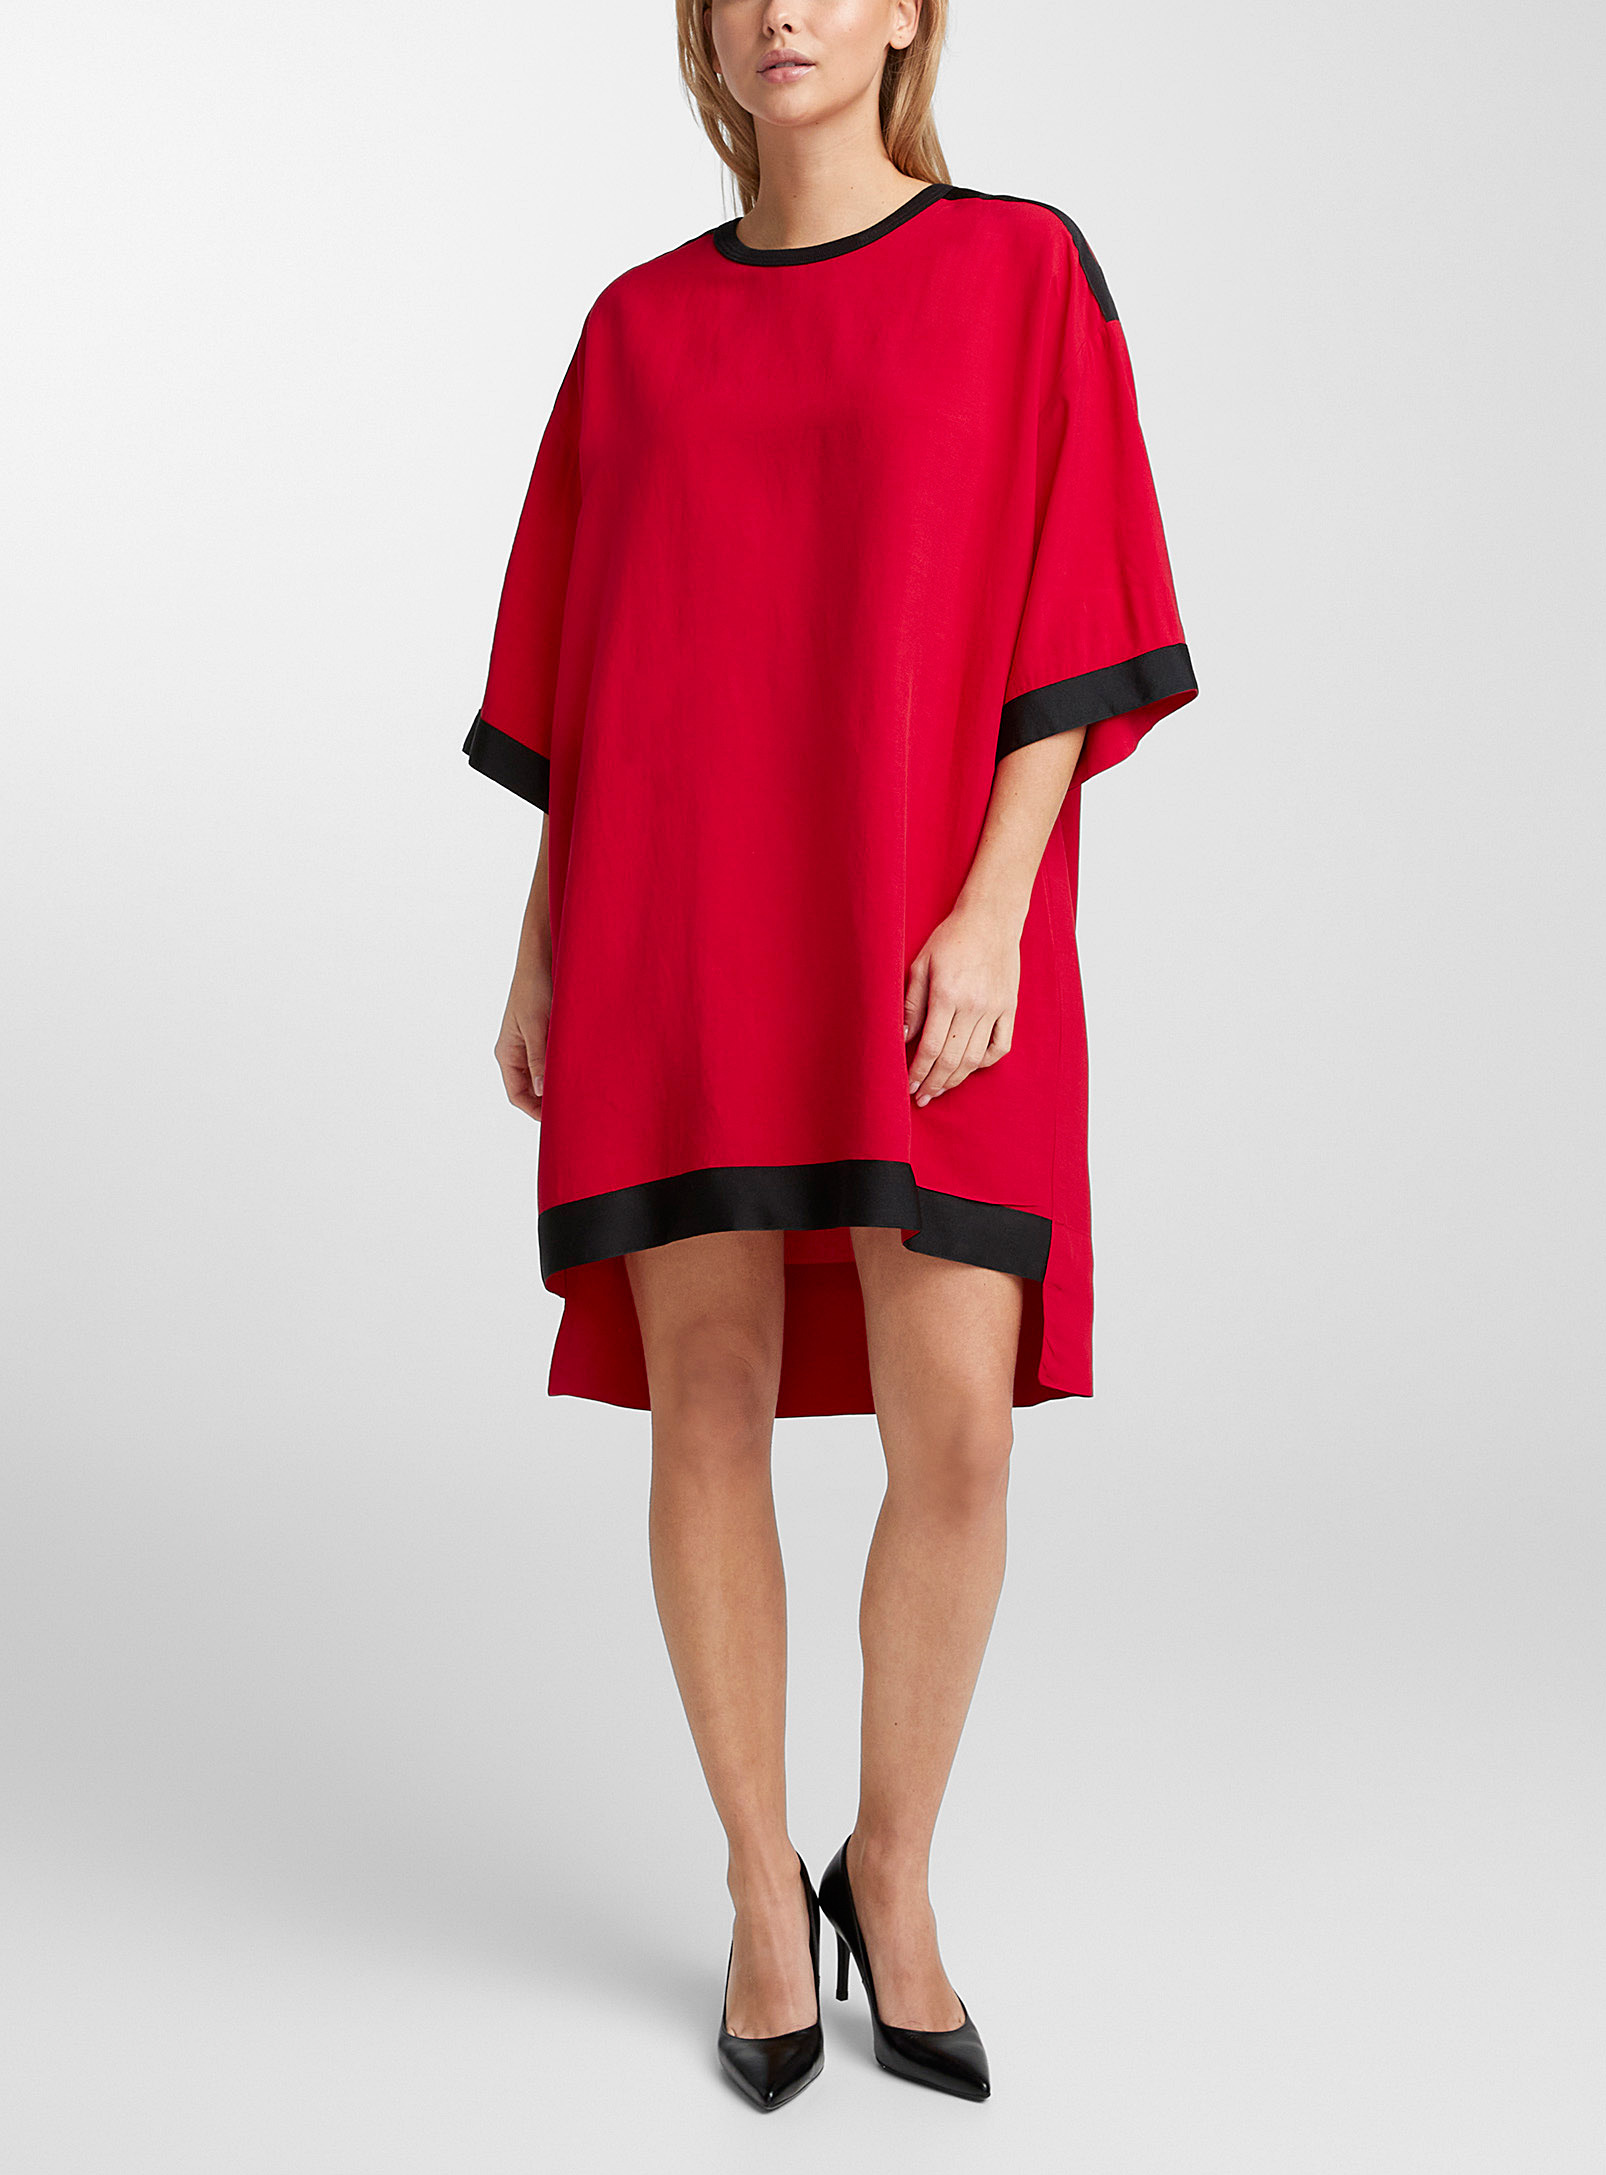 Denis Gagnon Mixed Media T-shirt Dress In Red